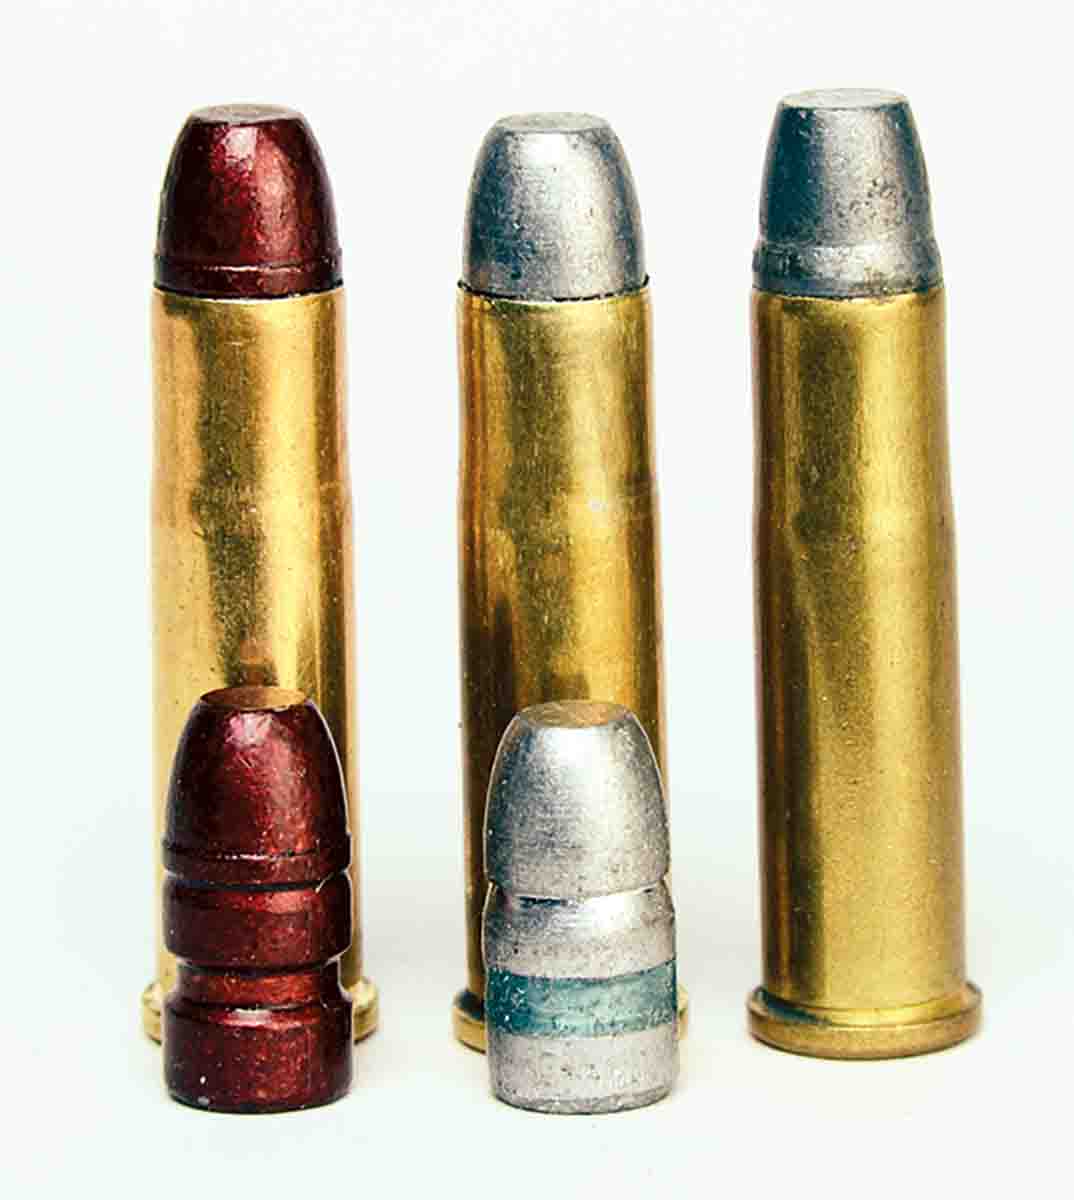 From left: .32-20s loaded with coated 115-grain flatpoint bullet from Missouri Bullet Company, a 115-grain flatpoint from Oregon Trail Bullet Company and a 115-grain flatnose Black Hills Cowboy factory load.